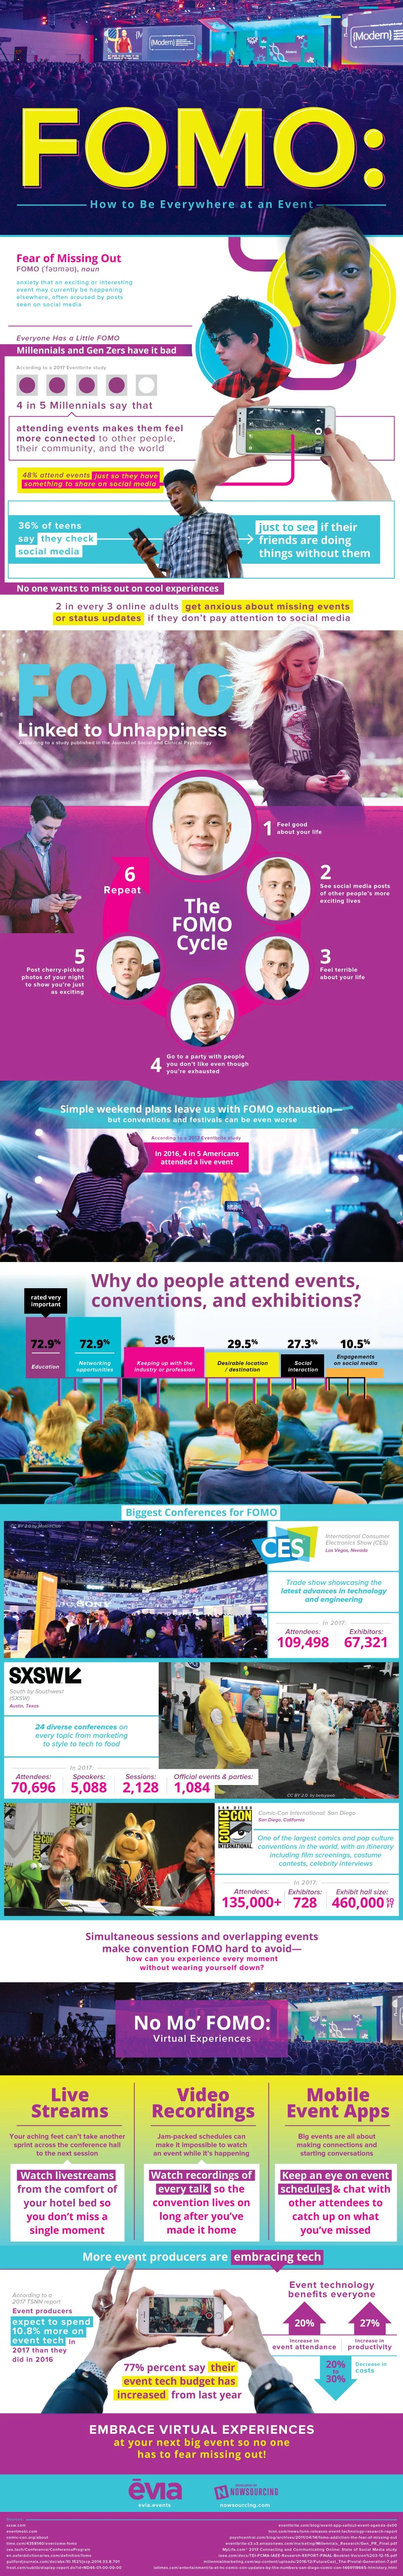 FOMO: how to be everywhere at an event - infographic